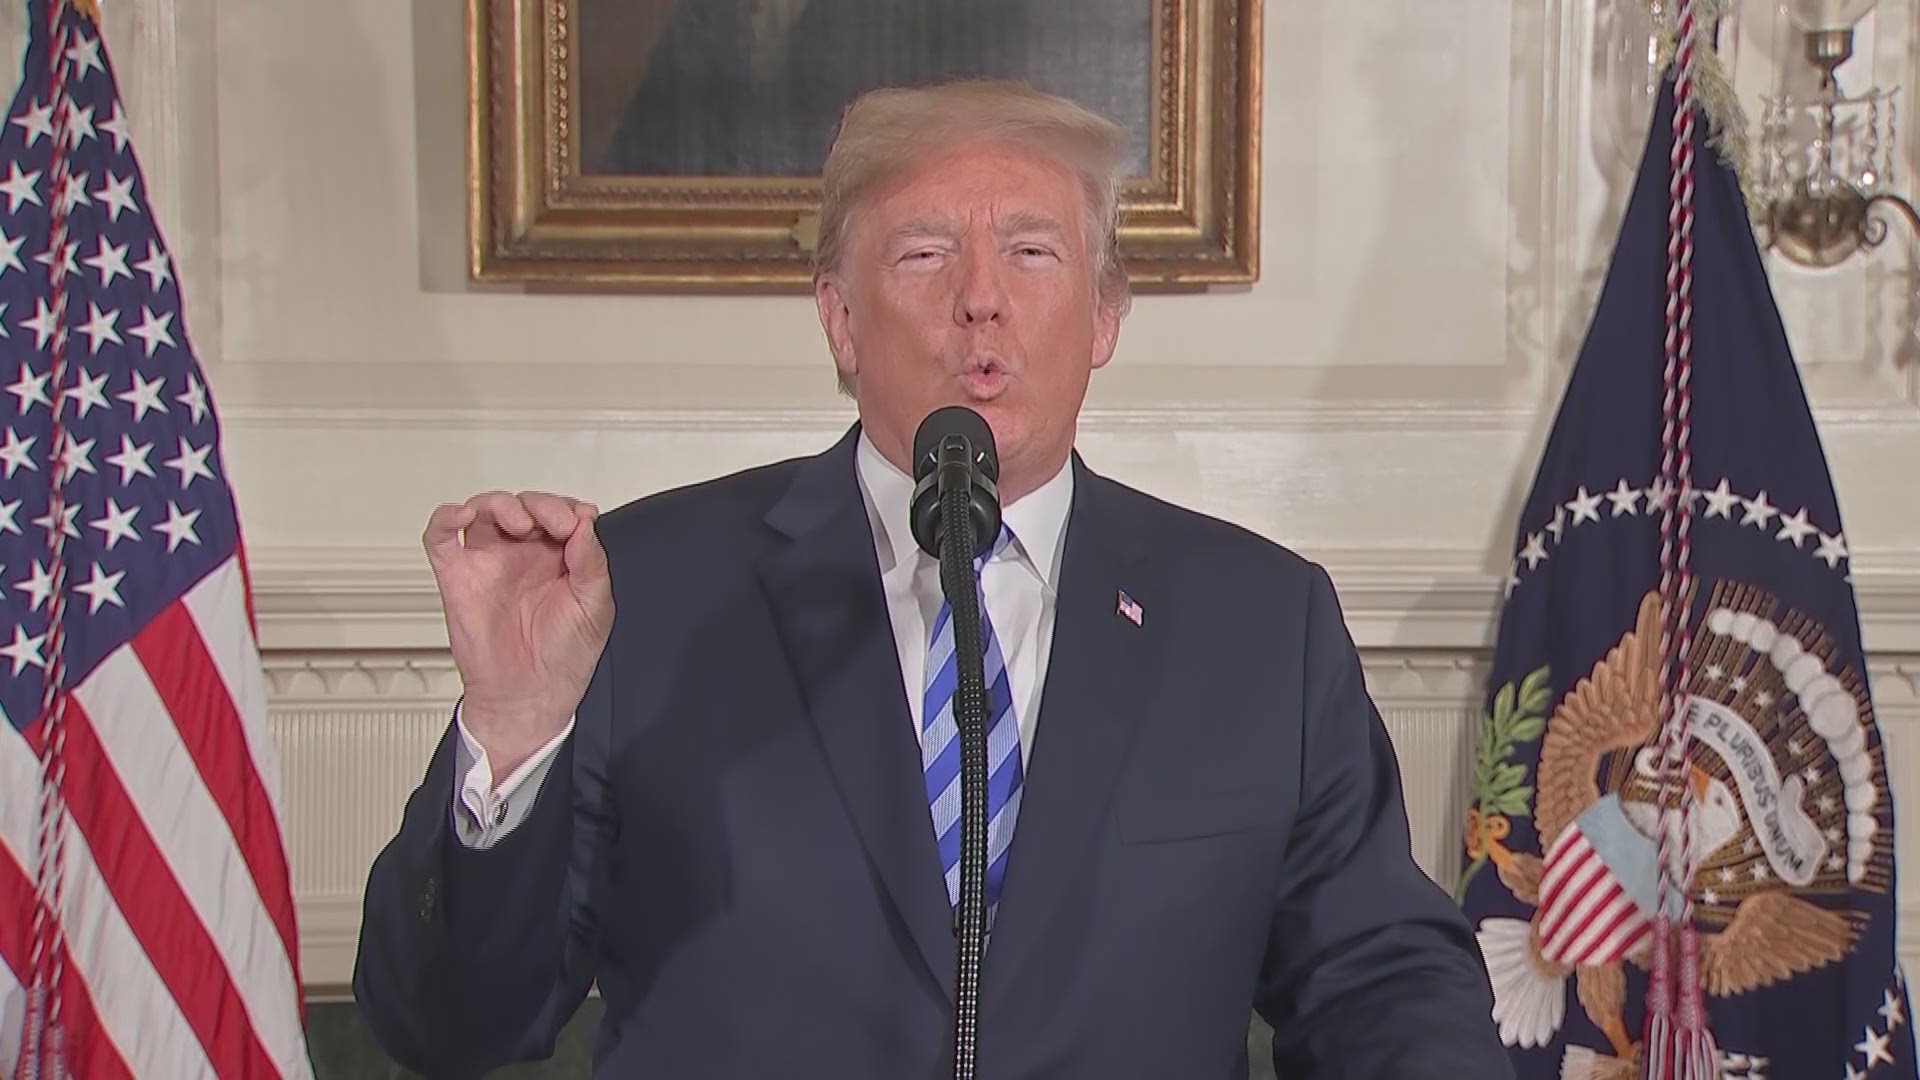 President Trump announced in a presser the United States would be pulling out of the Iran Nuclear Deal